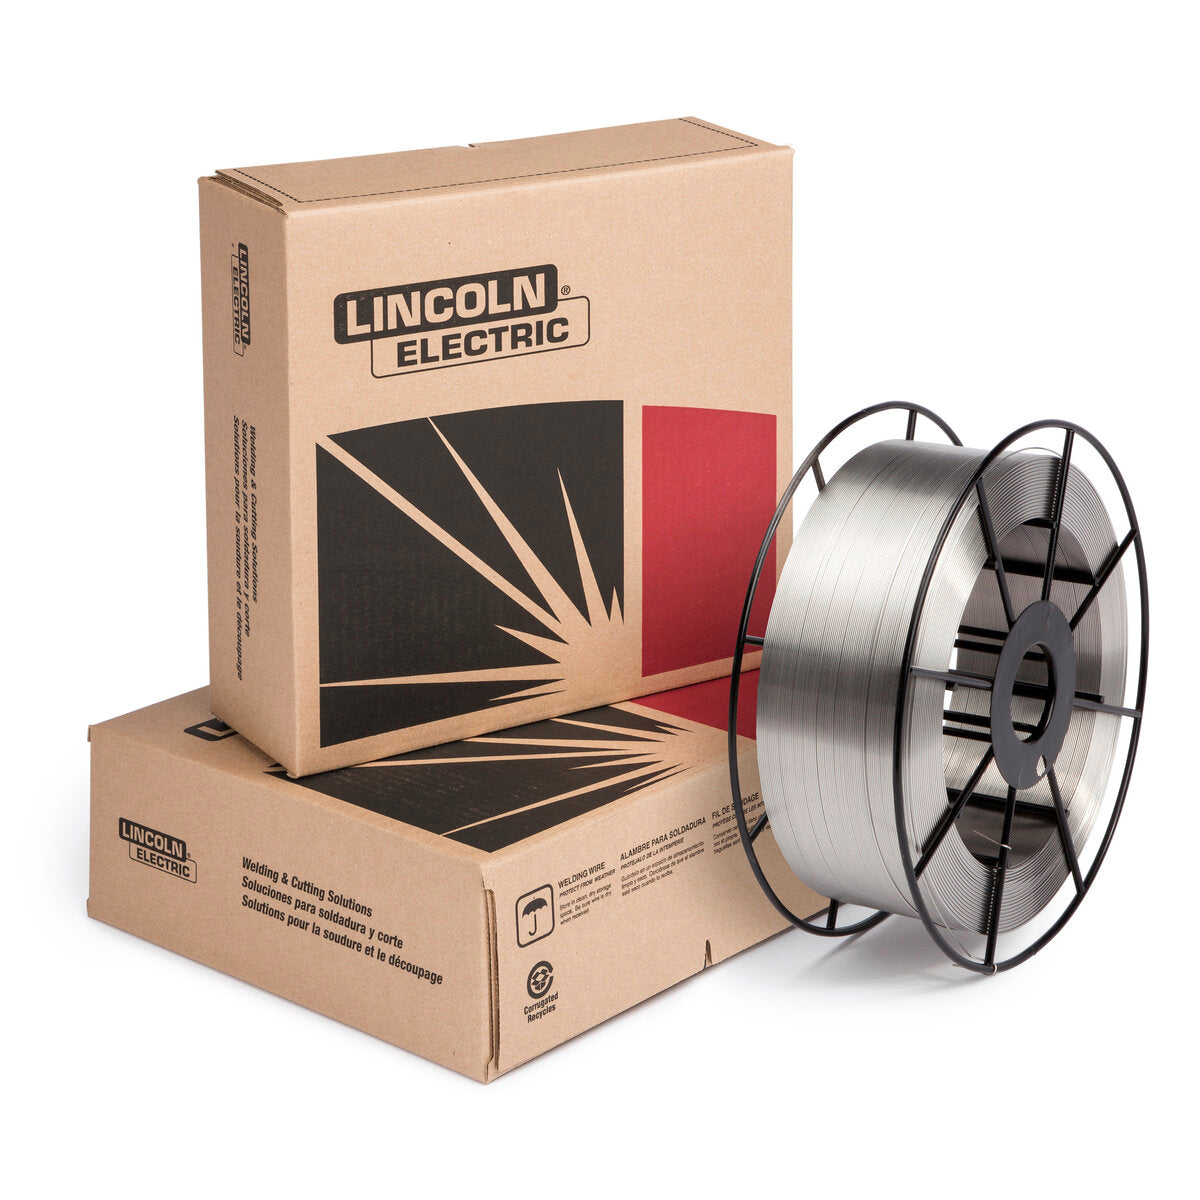 Lincoln Electric - Techalloy® 622 MIG (GMAW) Wire, 1/16 in, 33 lb Spool - MG622062667